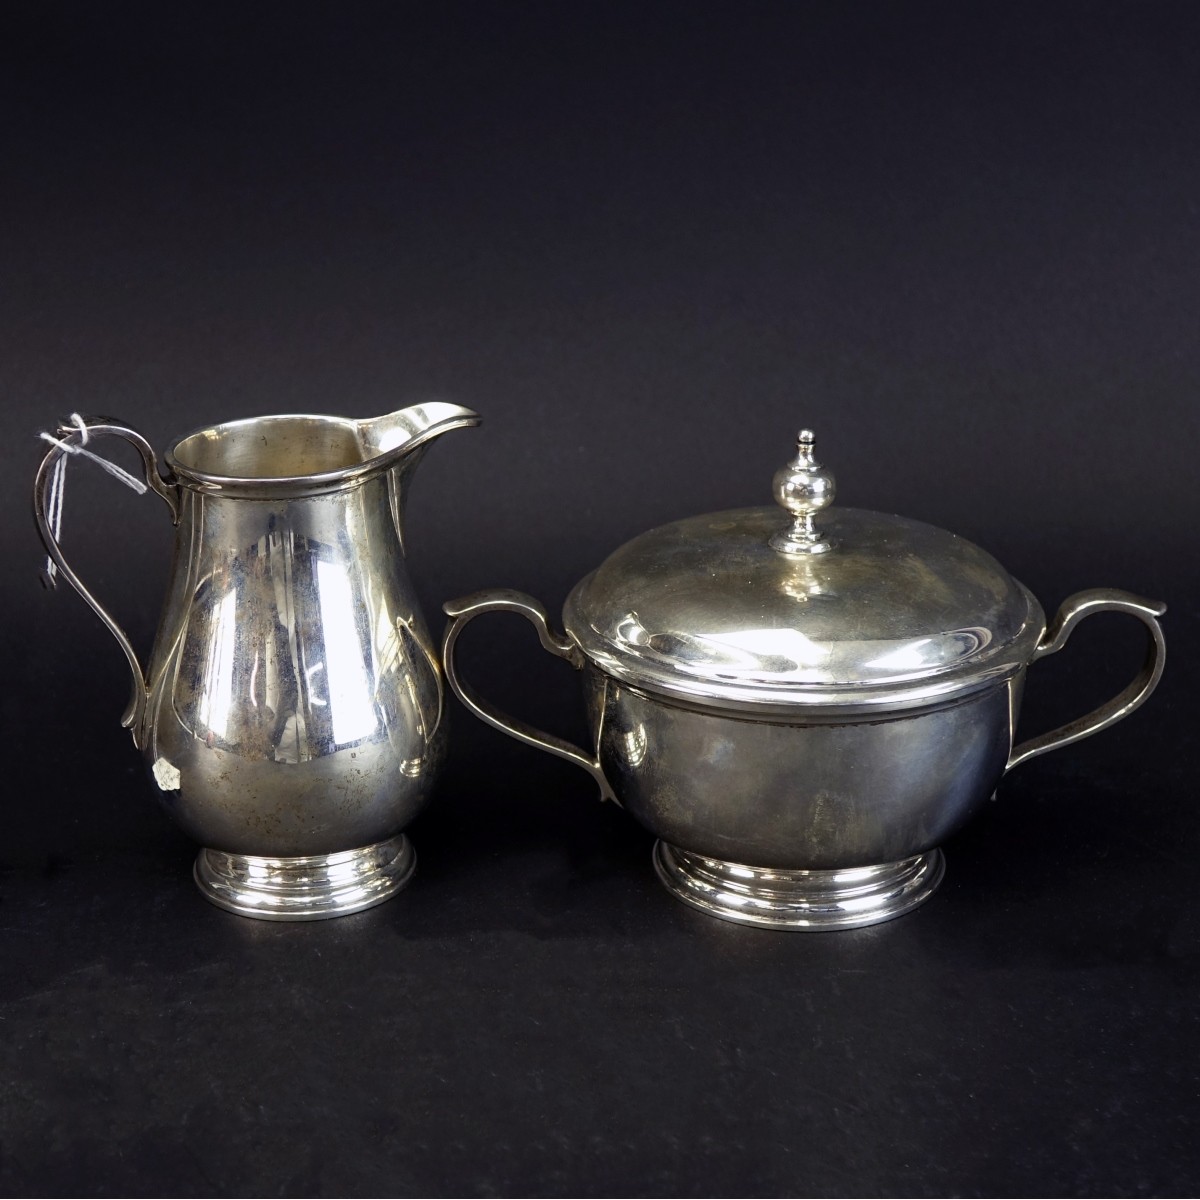 Tiffany Sterling Cream Pitcher and Lidded Sugar